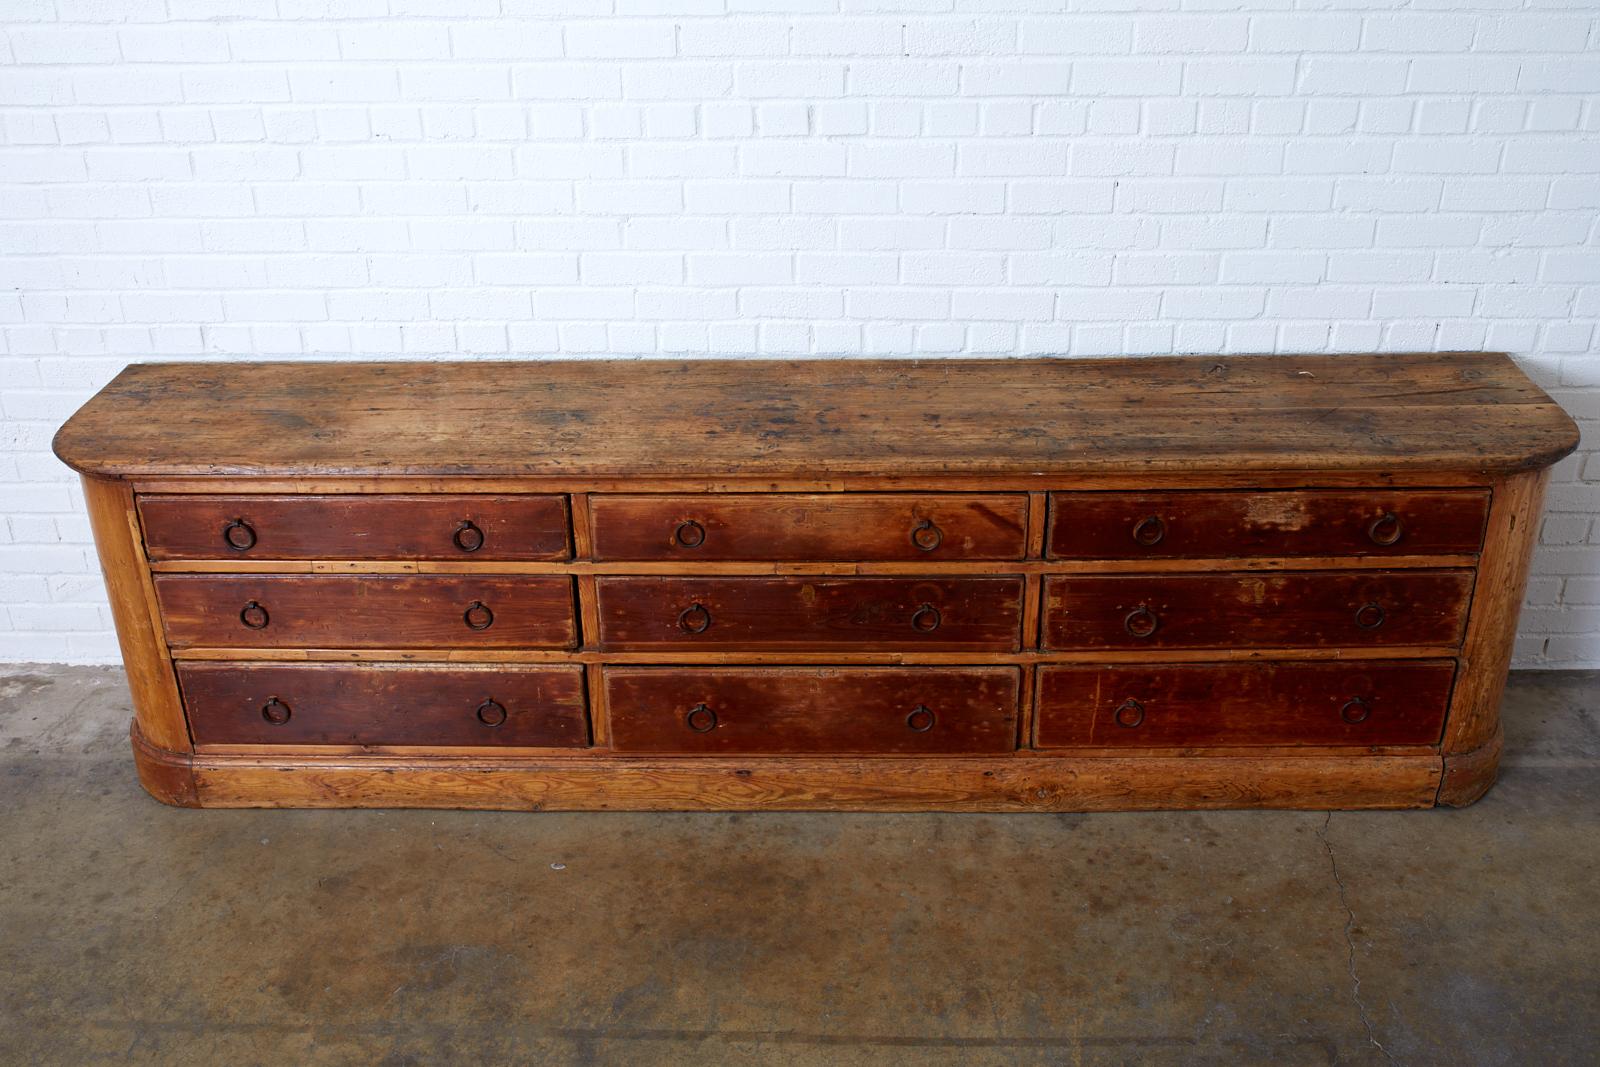 Hand-Crafted 18th Century Italian Pine Sideboard Chest Dresser